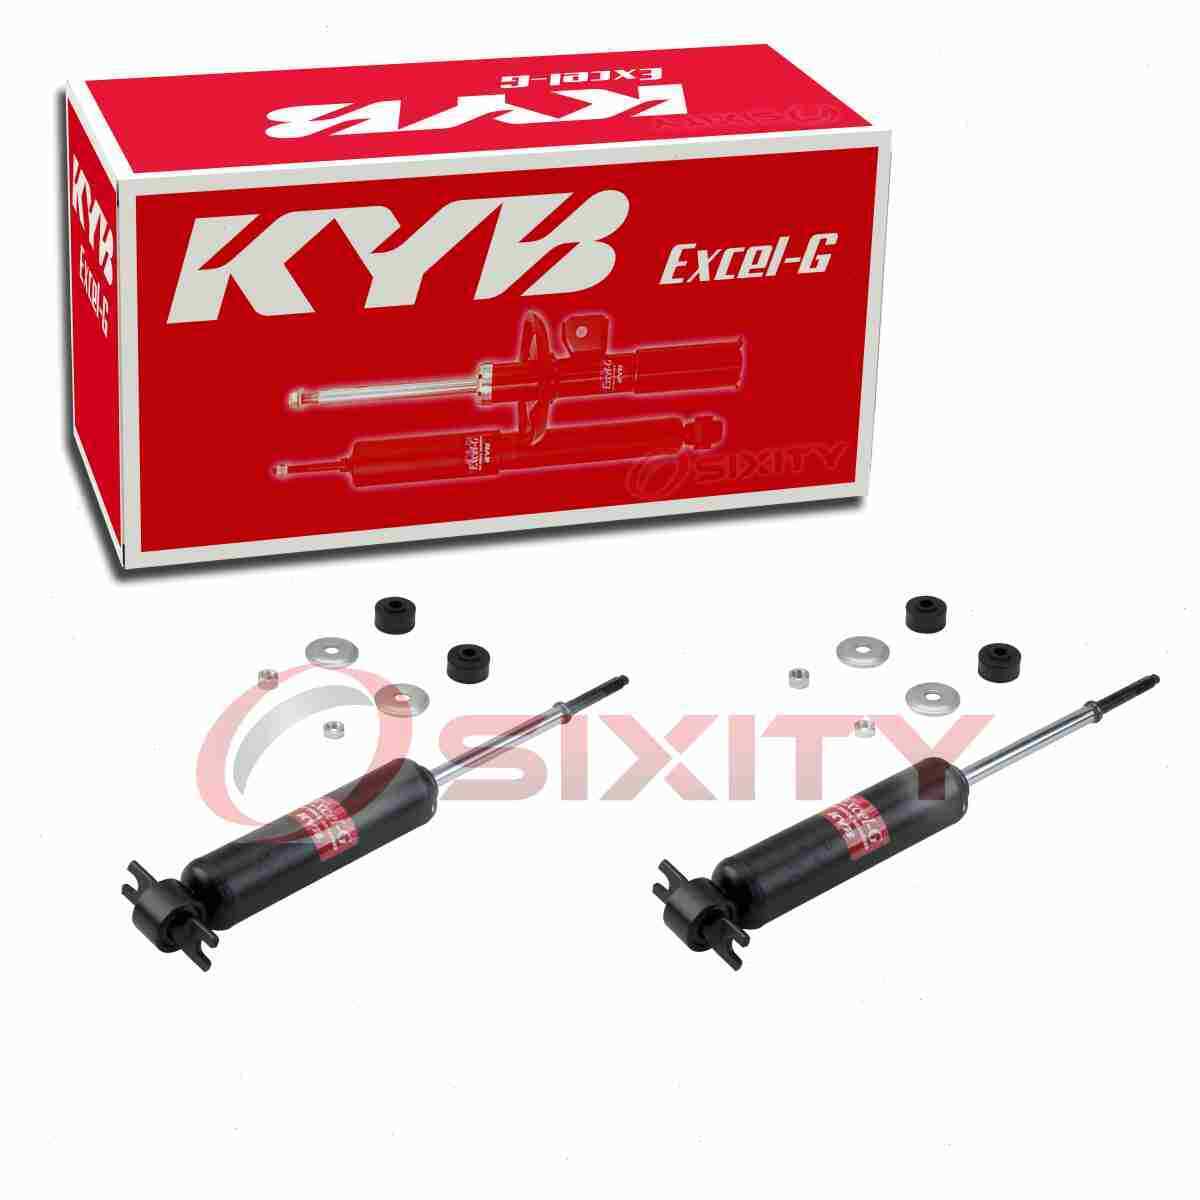 2 pc KYB Excel-G Front Shock Absorbers for 1978-1984 Oldsmobile Cutlass yc